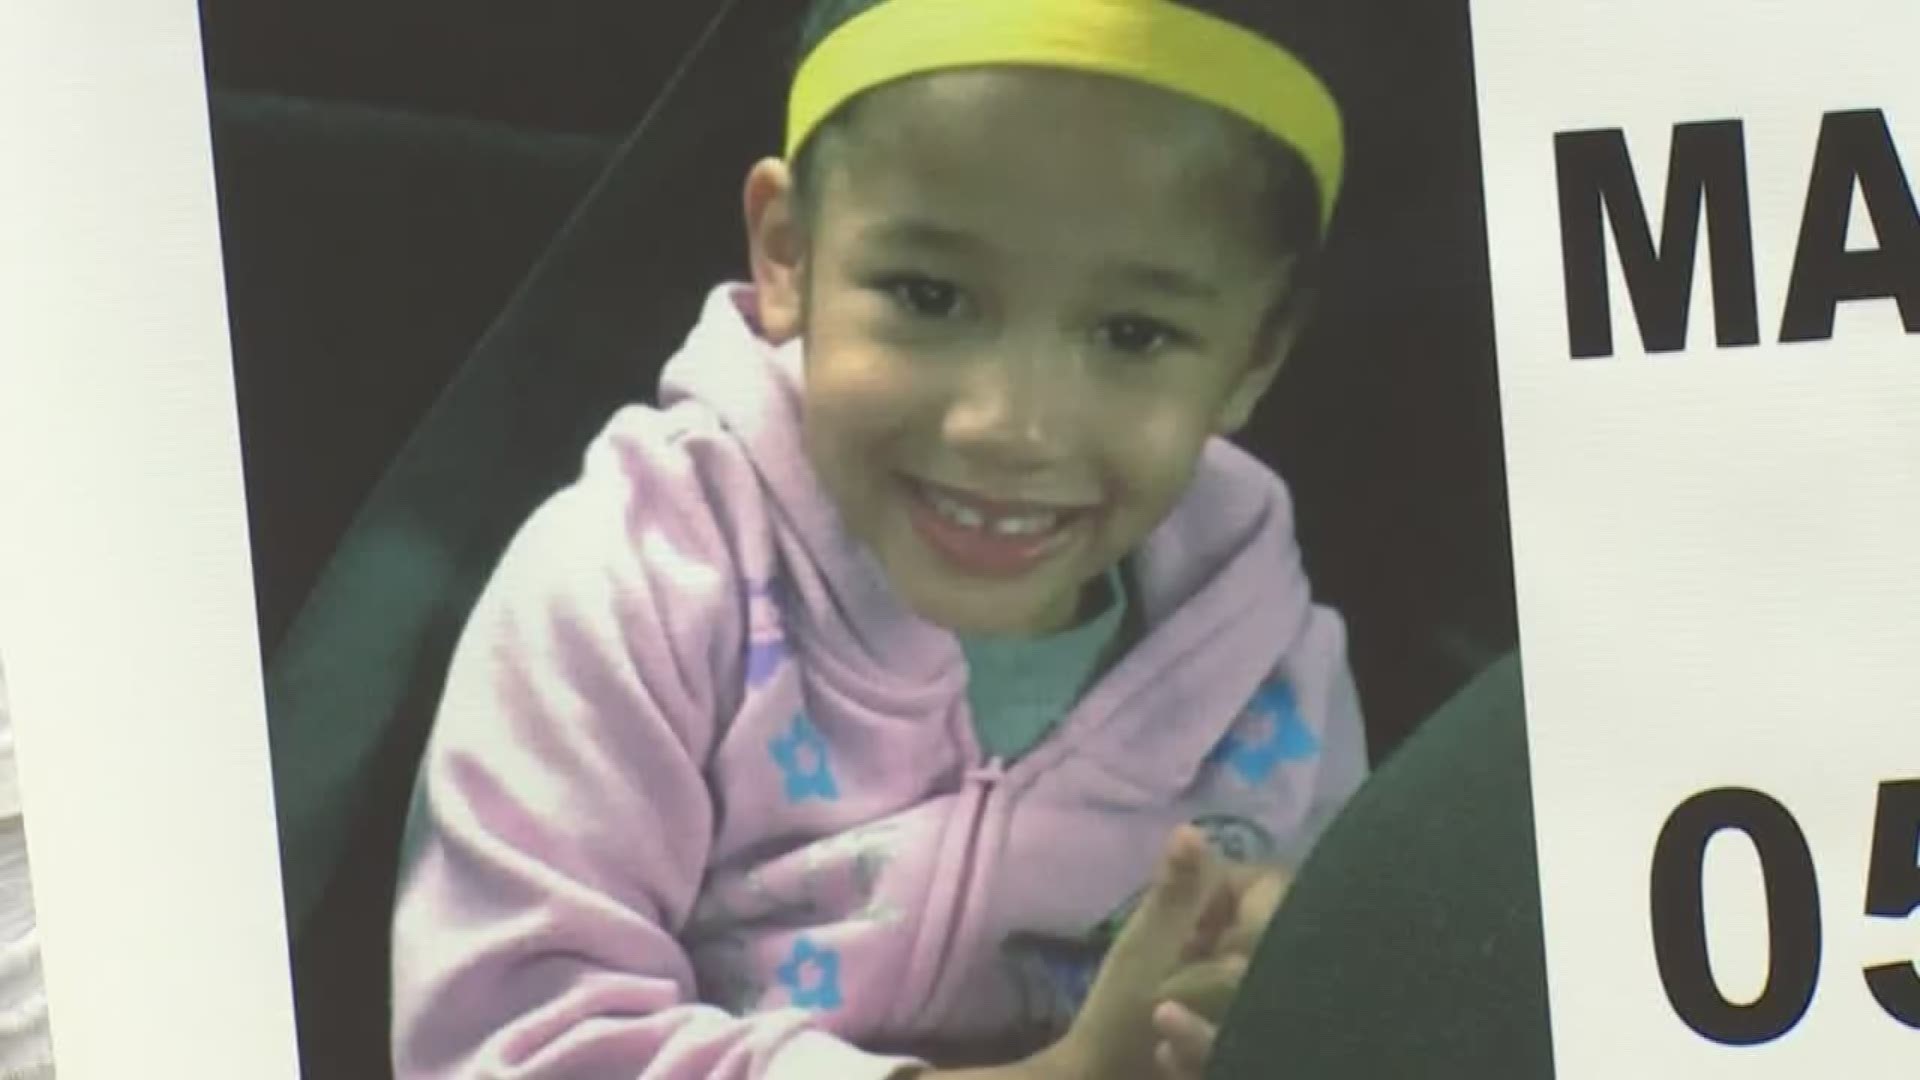 Texas Equusearch and local officials are trying to narrow the search for Maleah Davis who has been missing since Friday night.